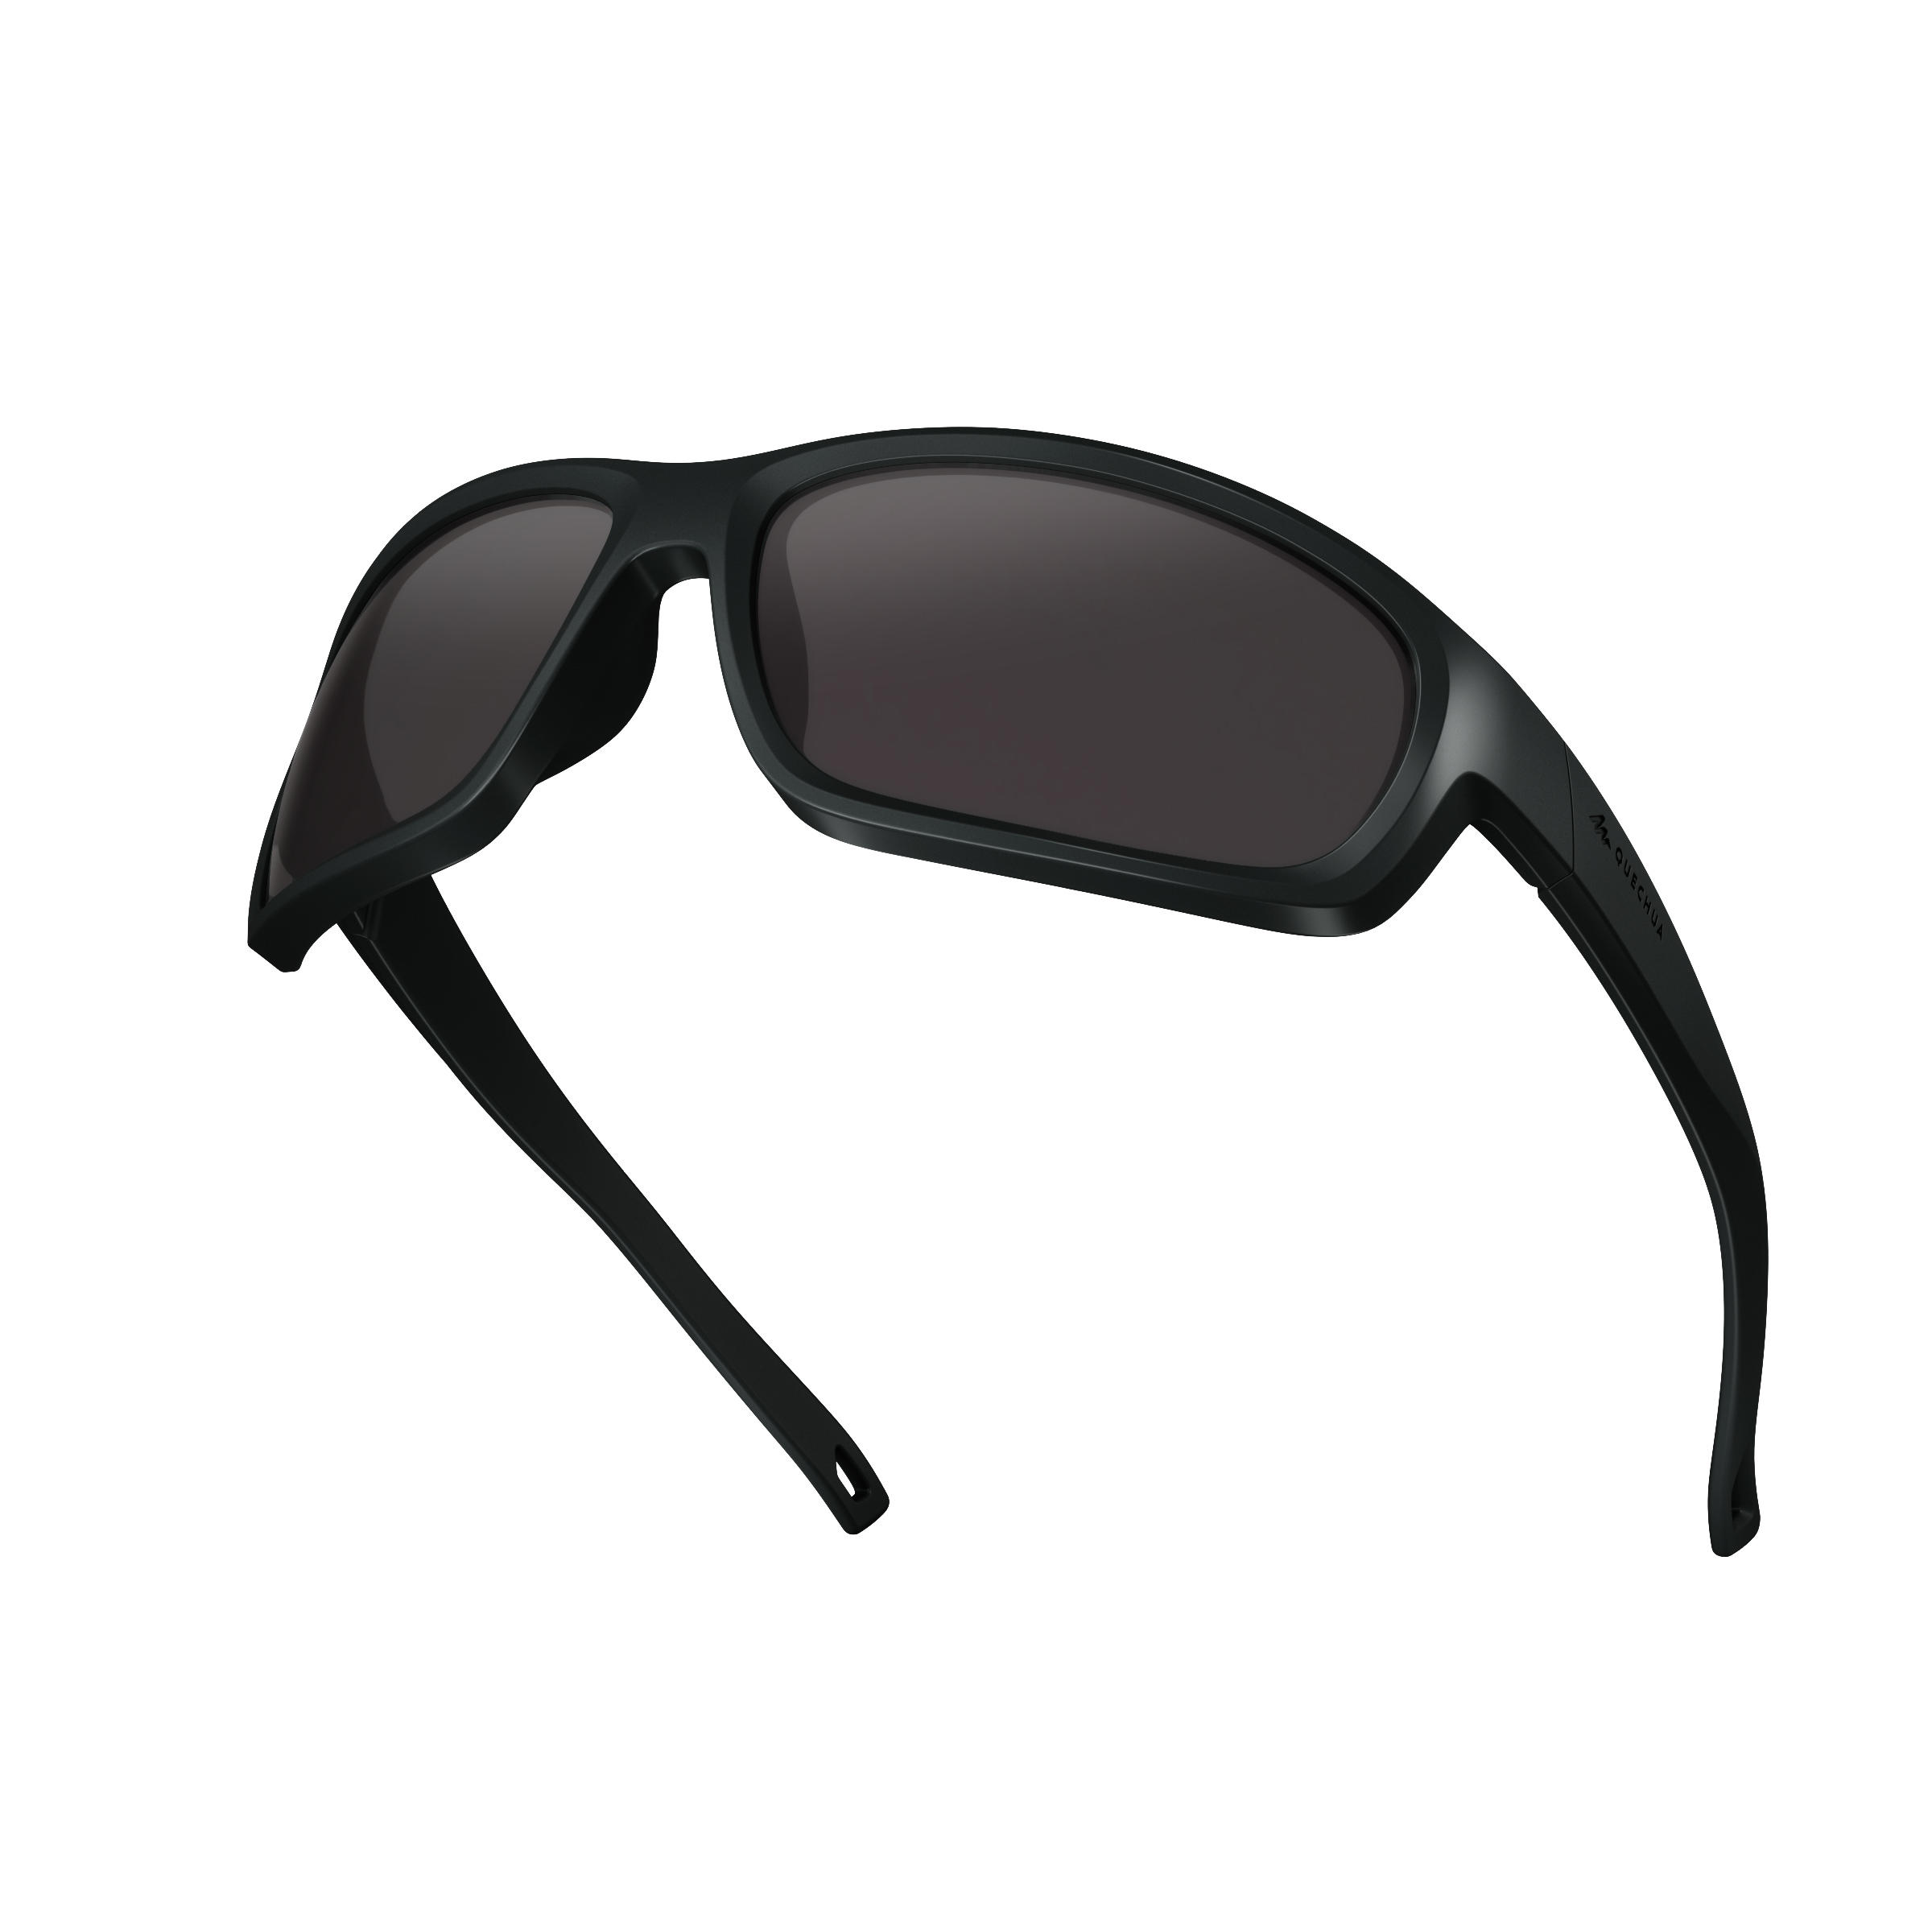 Get All the people with Special Style Adult Hiking Sunglasses - MH500 -  Category 3 at 34$